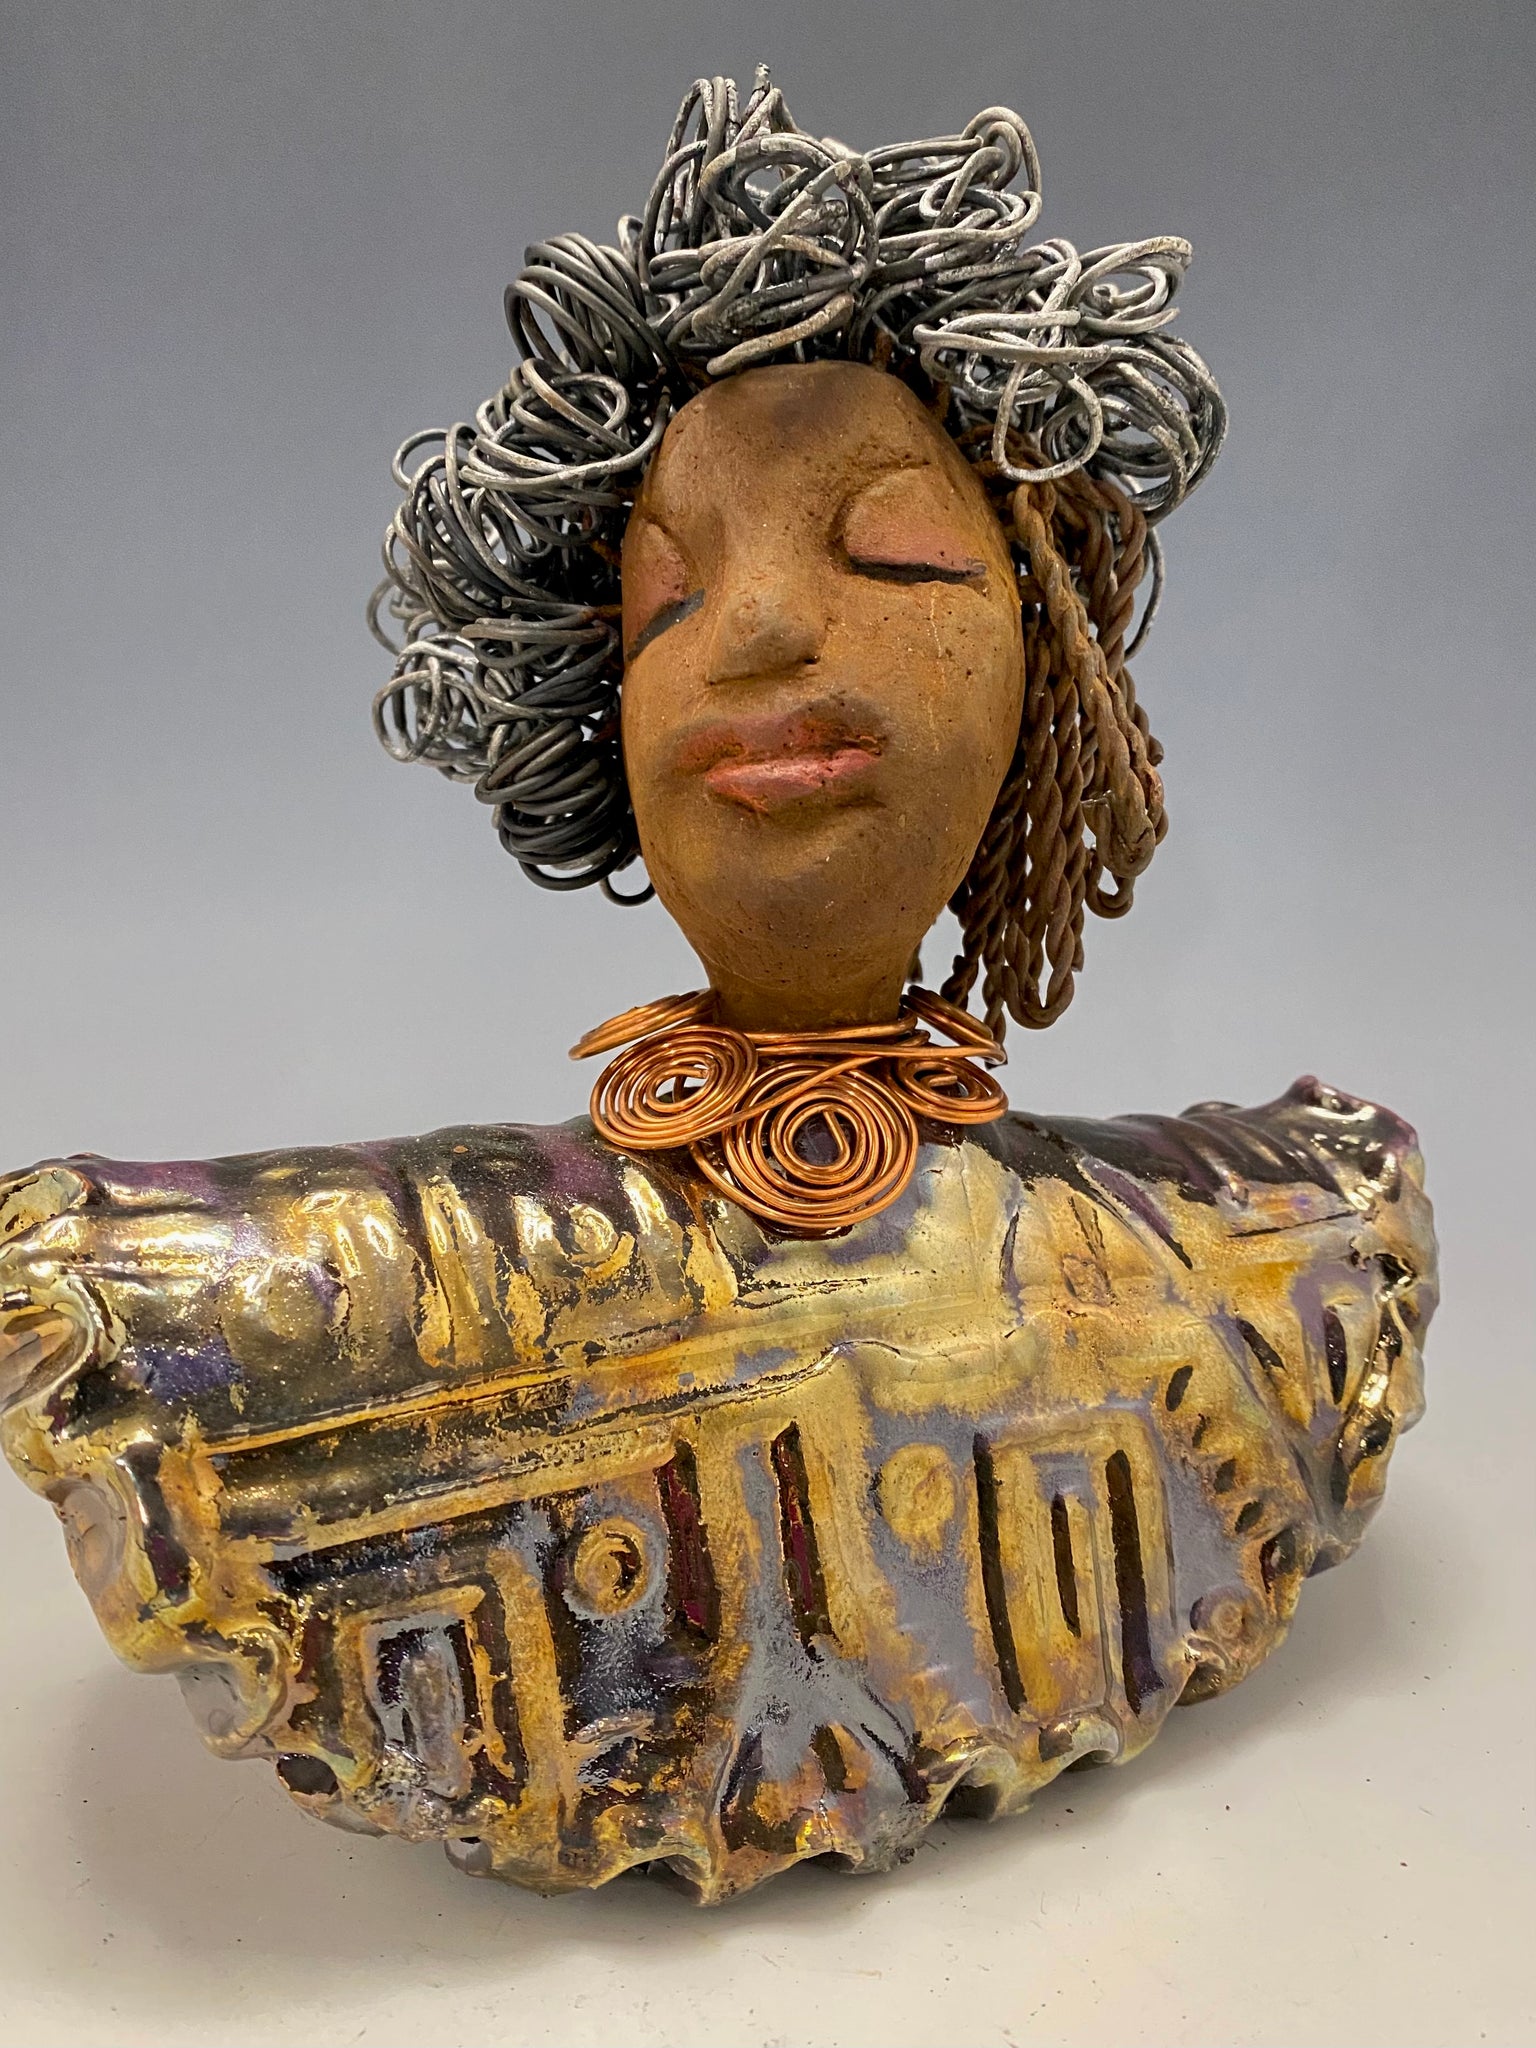 Meet Janet!  Janet looks up with joy and anticipation! She  stands 8" x 7" x 4" and weighs 2.70 lbs. She has a beautiful textured gold and  copper robe trim. Janet has braided ,twisted, and curled wire hair. She has a honey brown complexion and soft reddish brown lips. Janet will make for great conversation in your home.